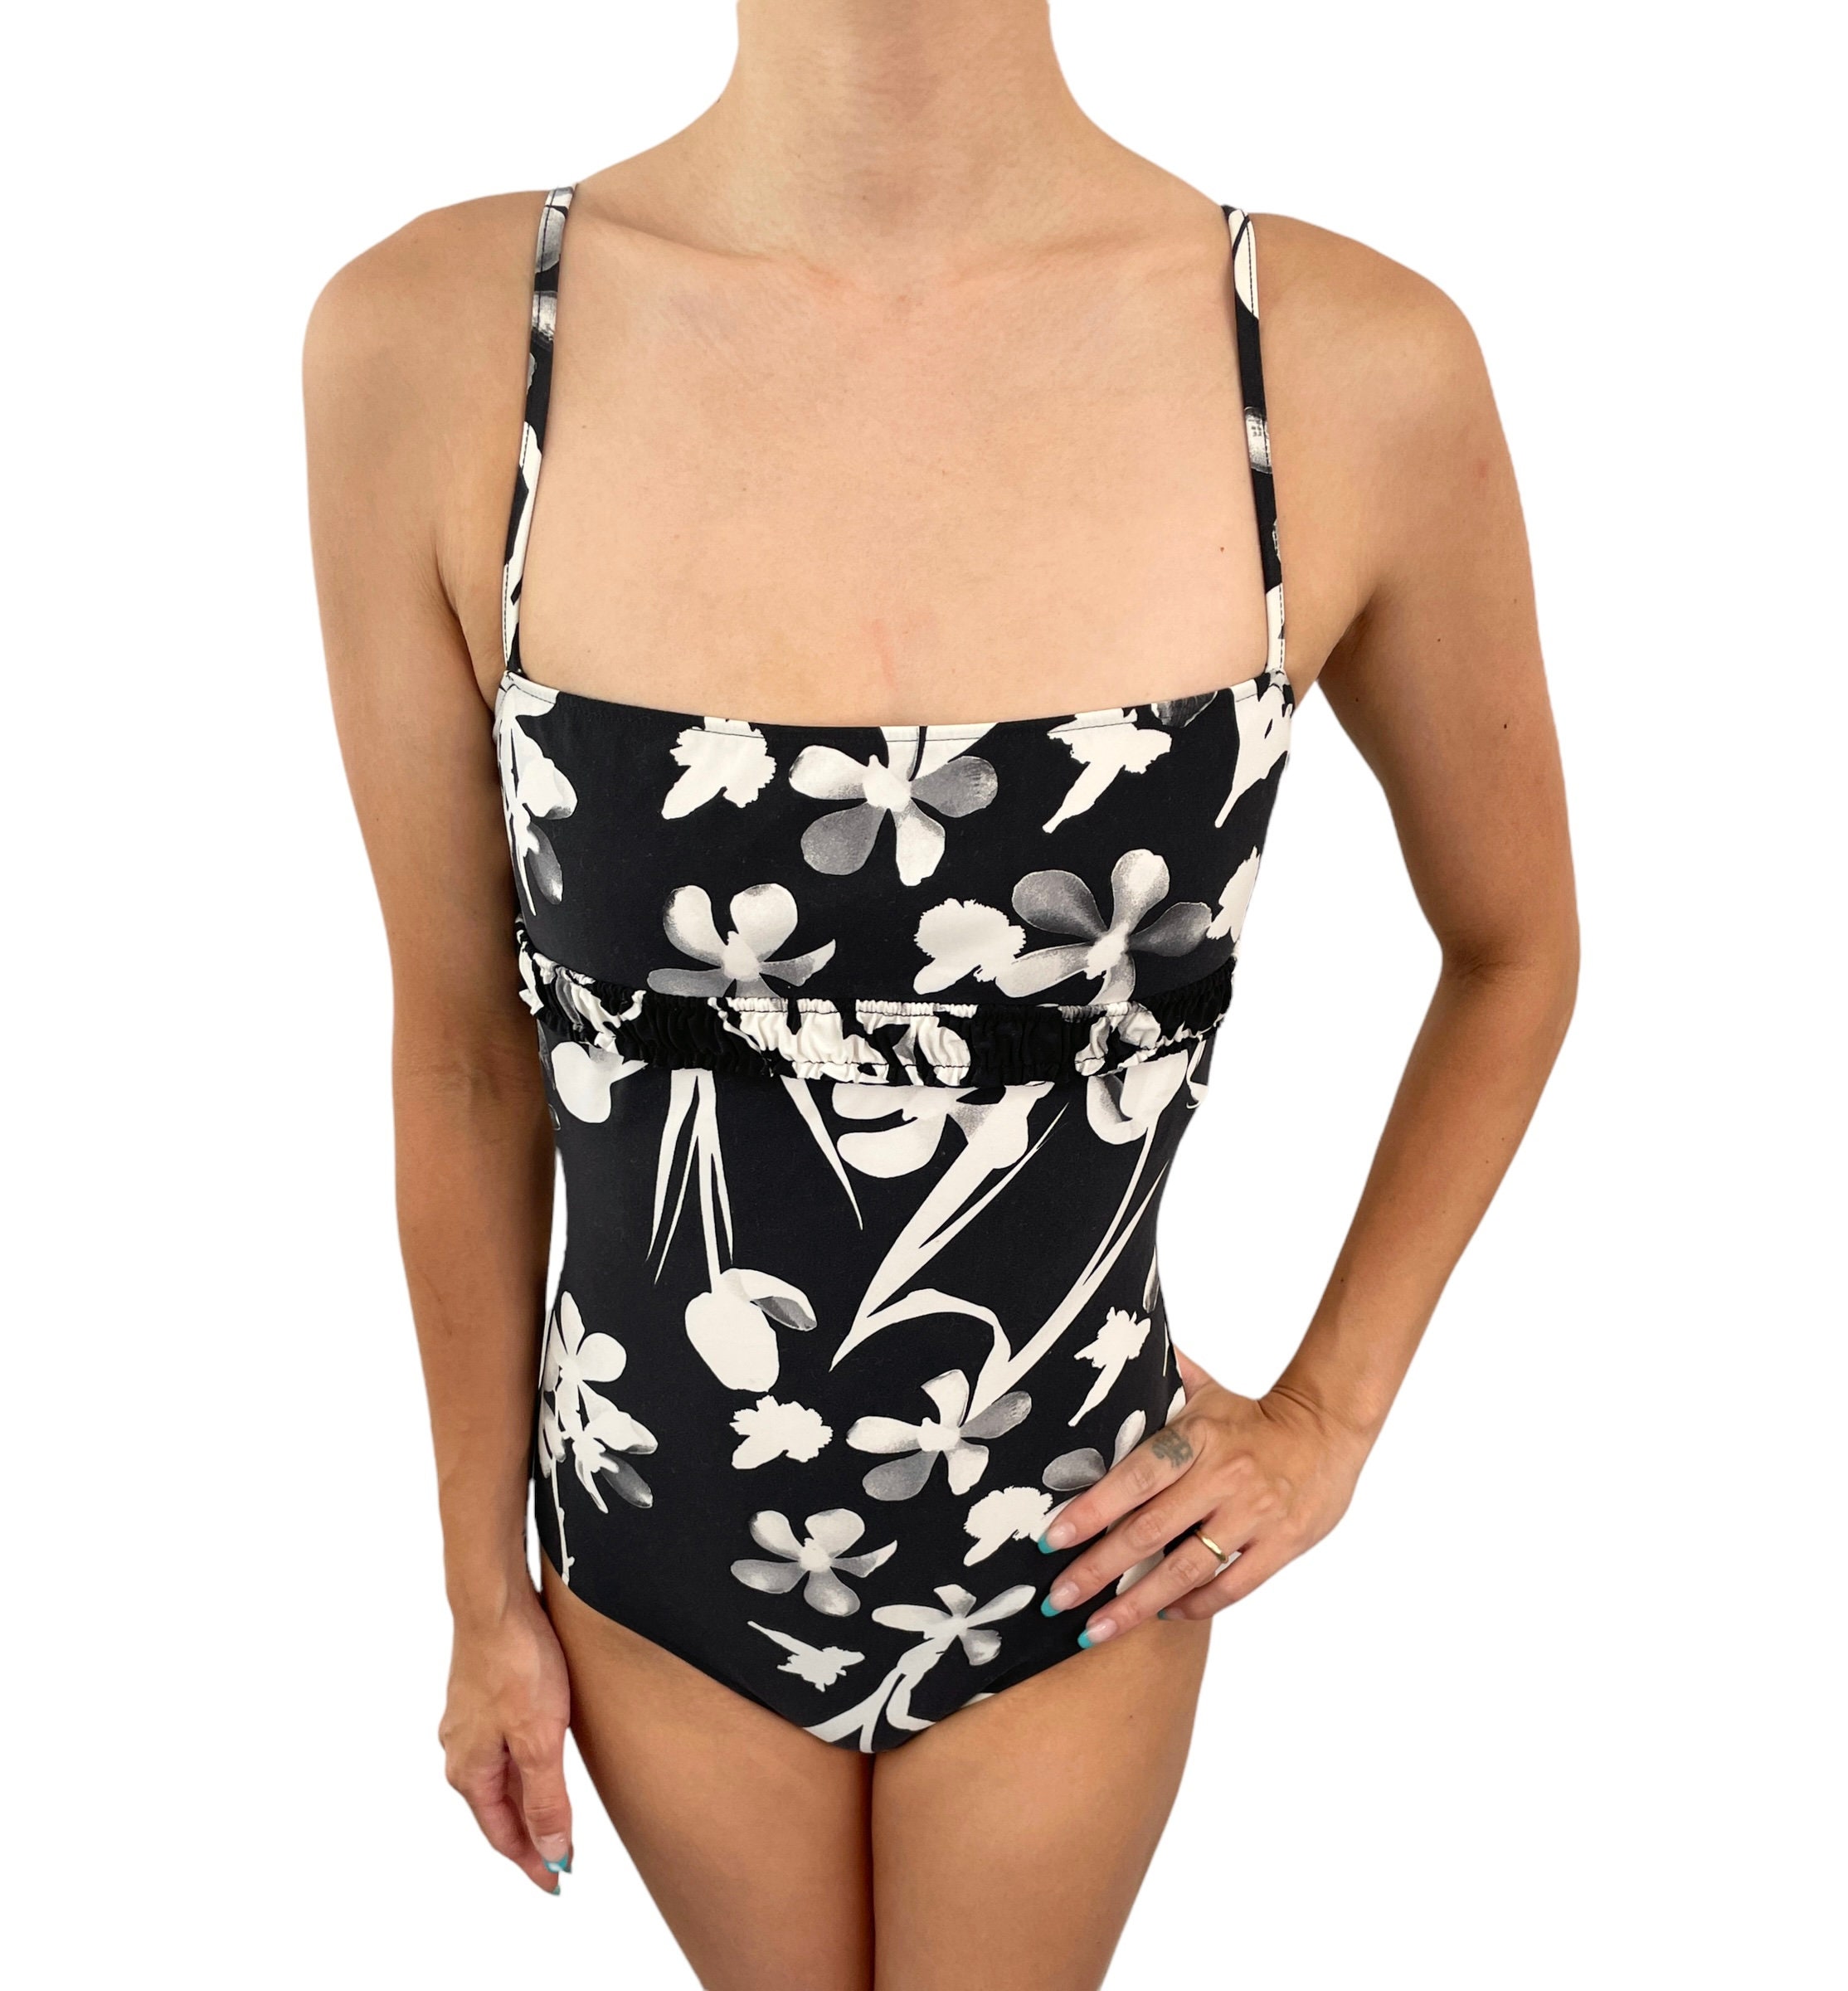 chanel black and white bathing suit top